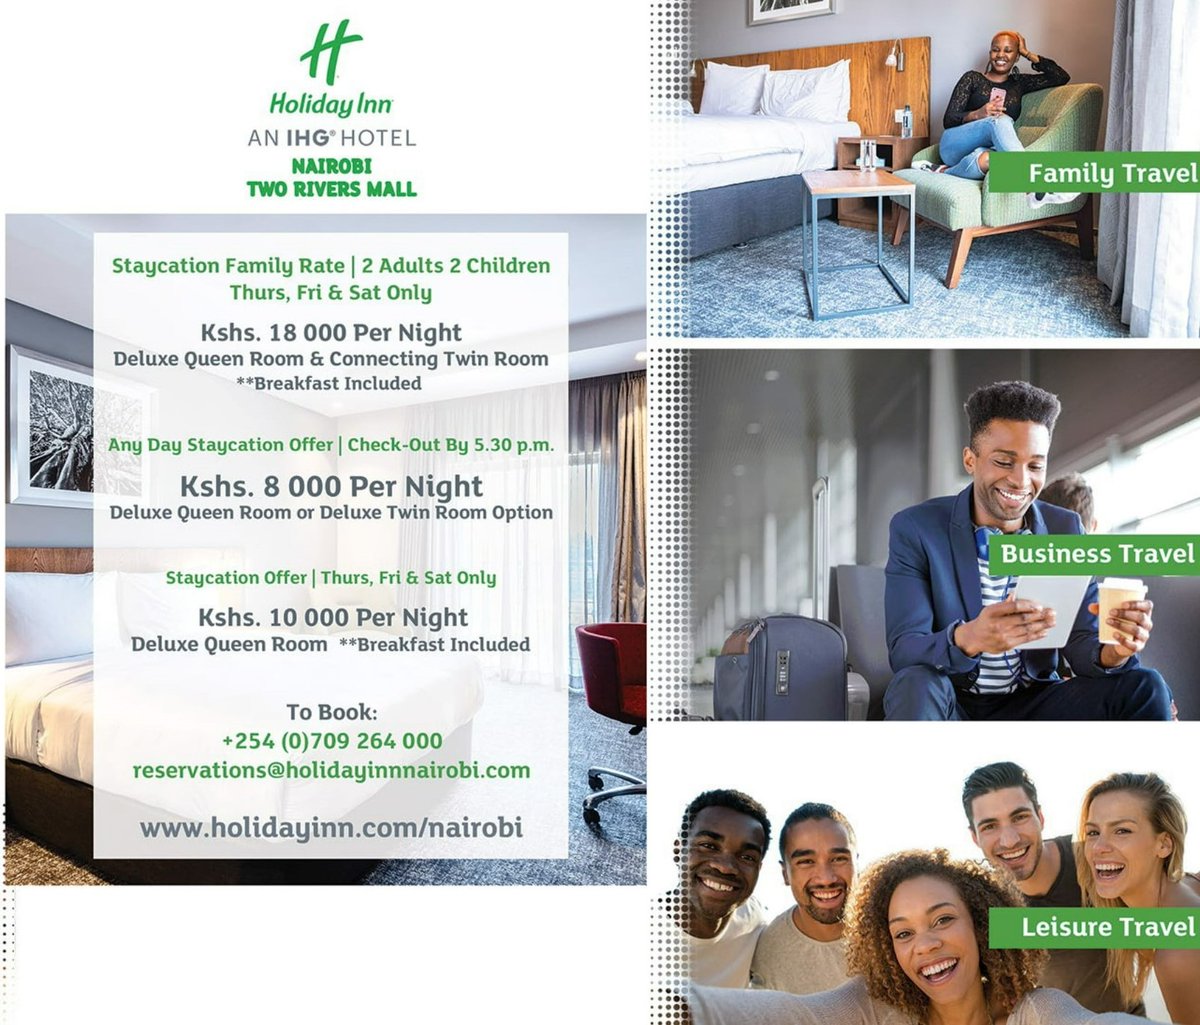 Get ready to start the new month - refreshed and relaxed 😎 
▫️ Time to book your staycation and cross out 'R&R time' on your bucket list

#HolidayInnNairobi   
#staycationkenya
#ExperienceIHG
#BeThereIRL  
#staycationnairobi
#staycations
#staycationkenya